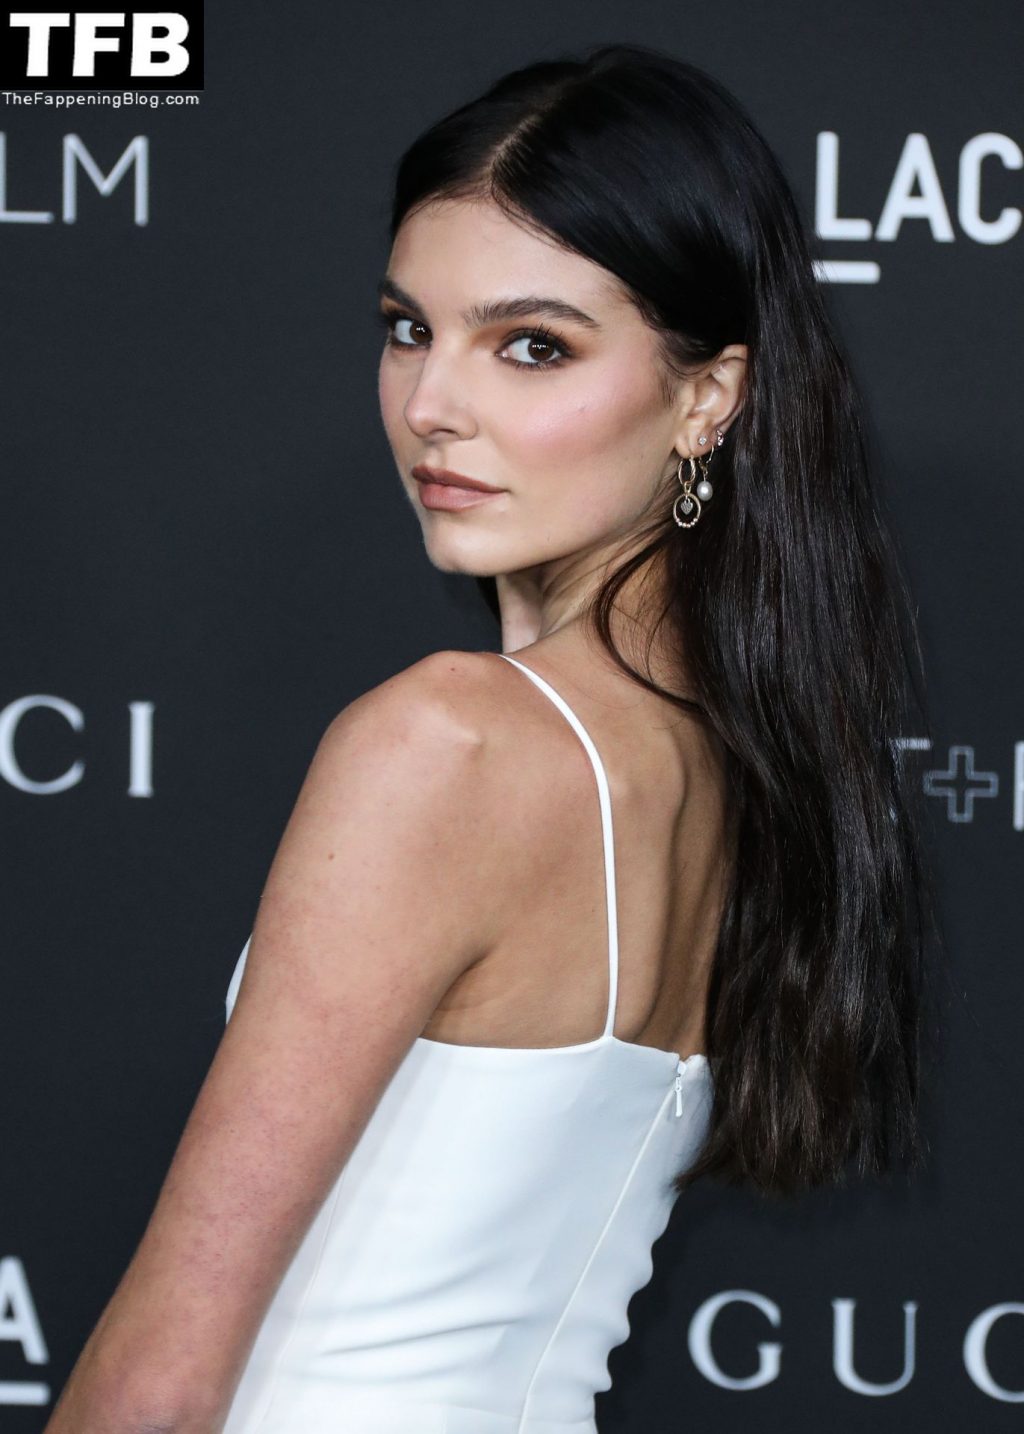 Amélie Tremblay Displays Her Sexy Tits in a White Dress at the 10th Annual LACMA Art + Film Gala (16 Photos)